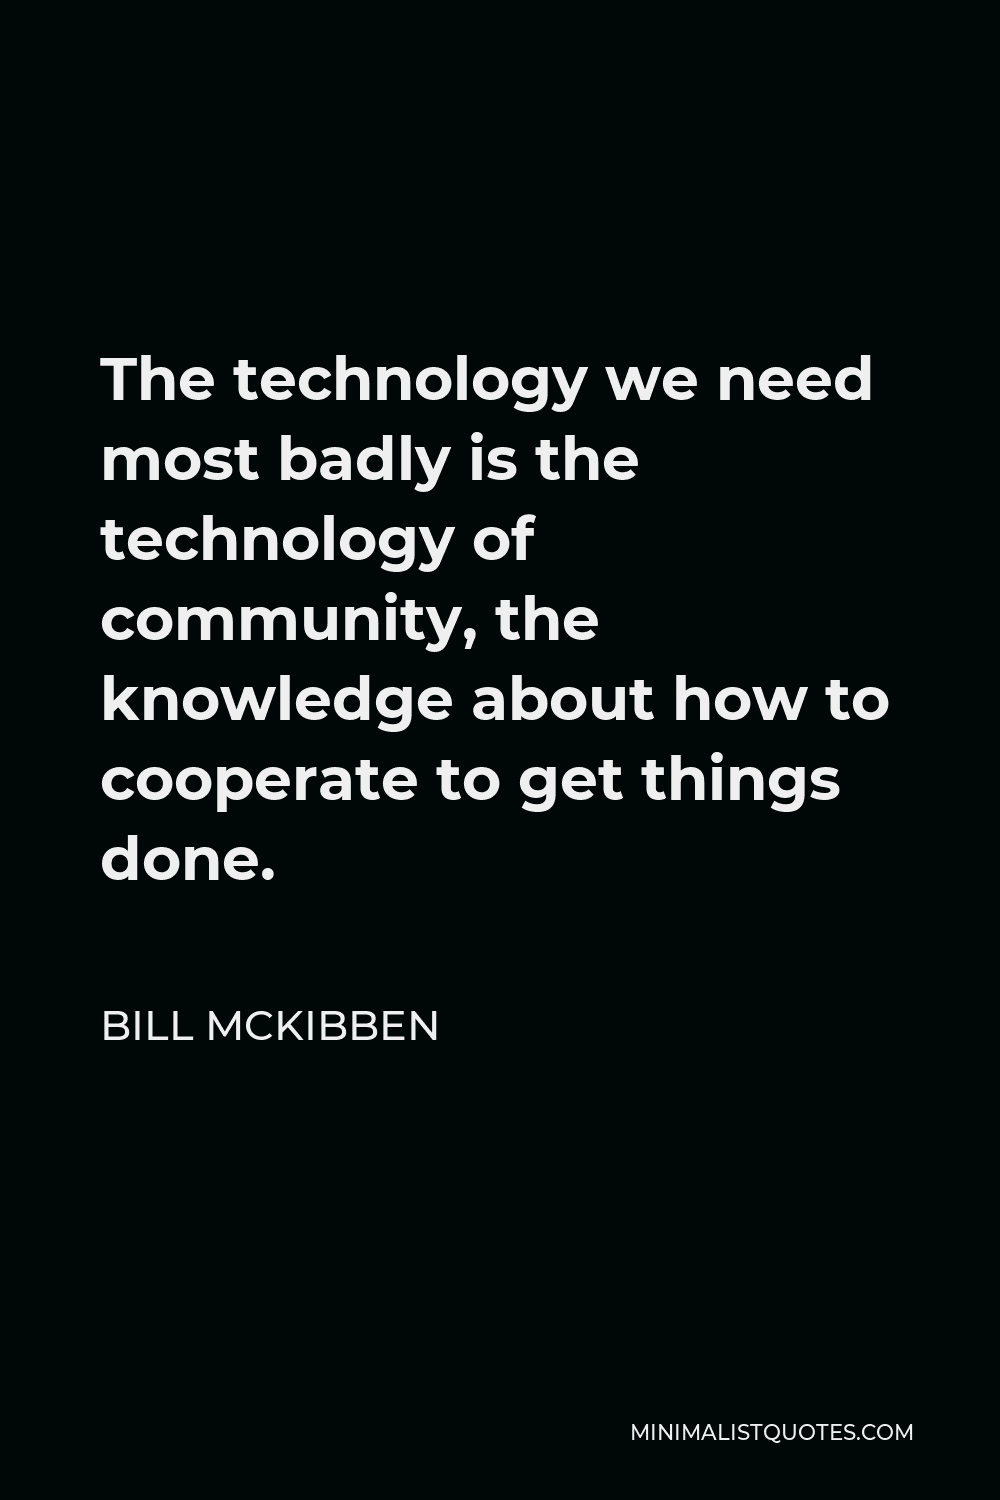 Bill McKibben Quote - The technology we need most badly is the technology of community, the knowledge about how to cooperate to get things done.